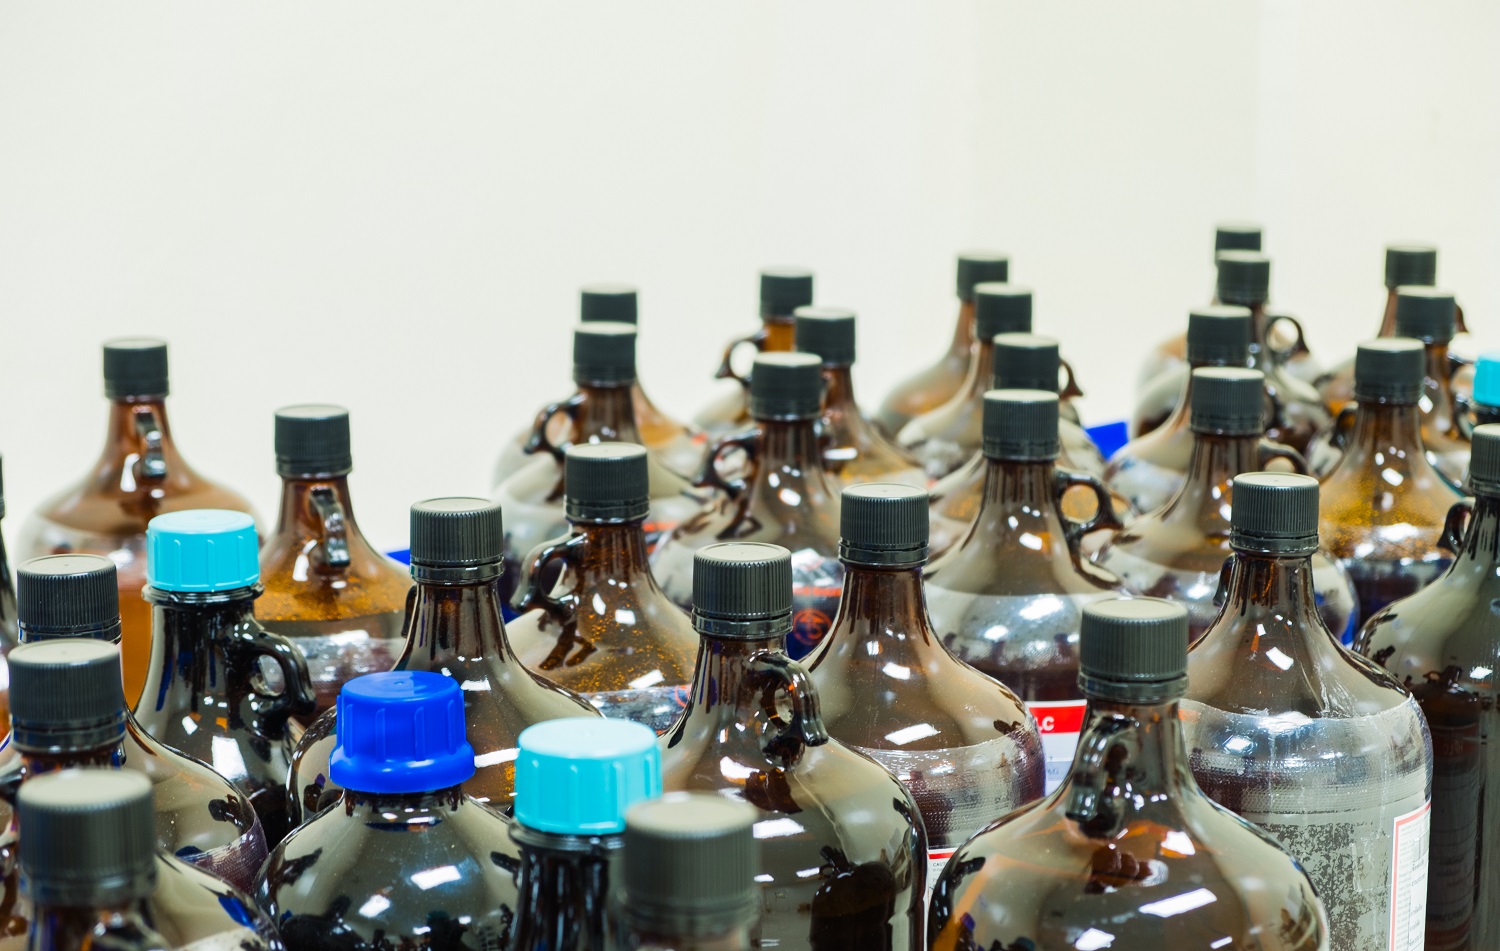 When and Where to make Hazardous Waste Determination in a Laboratory.